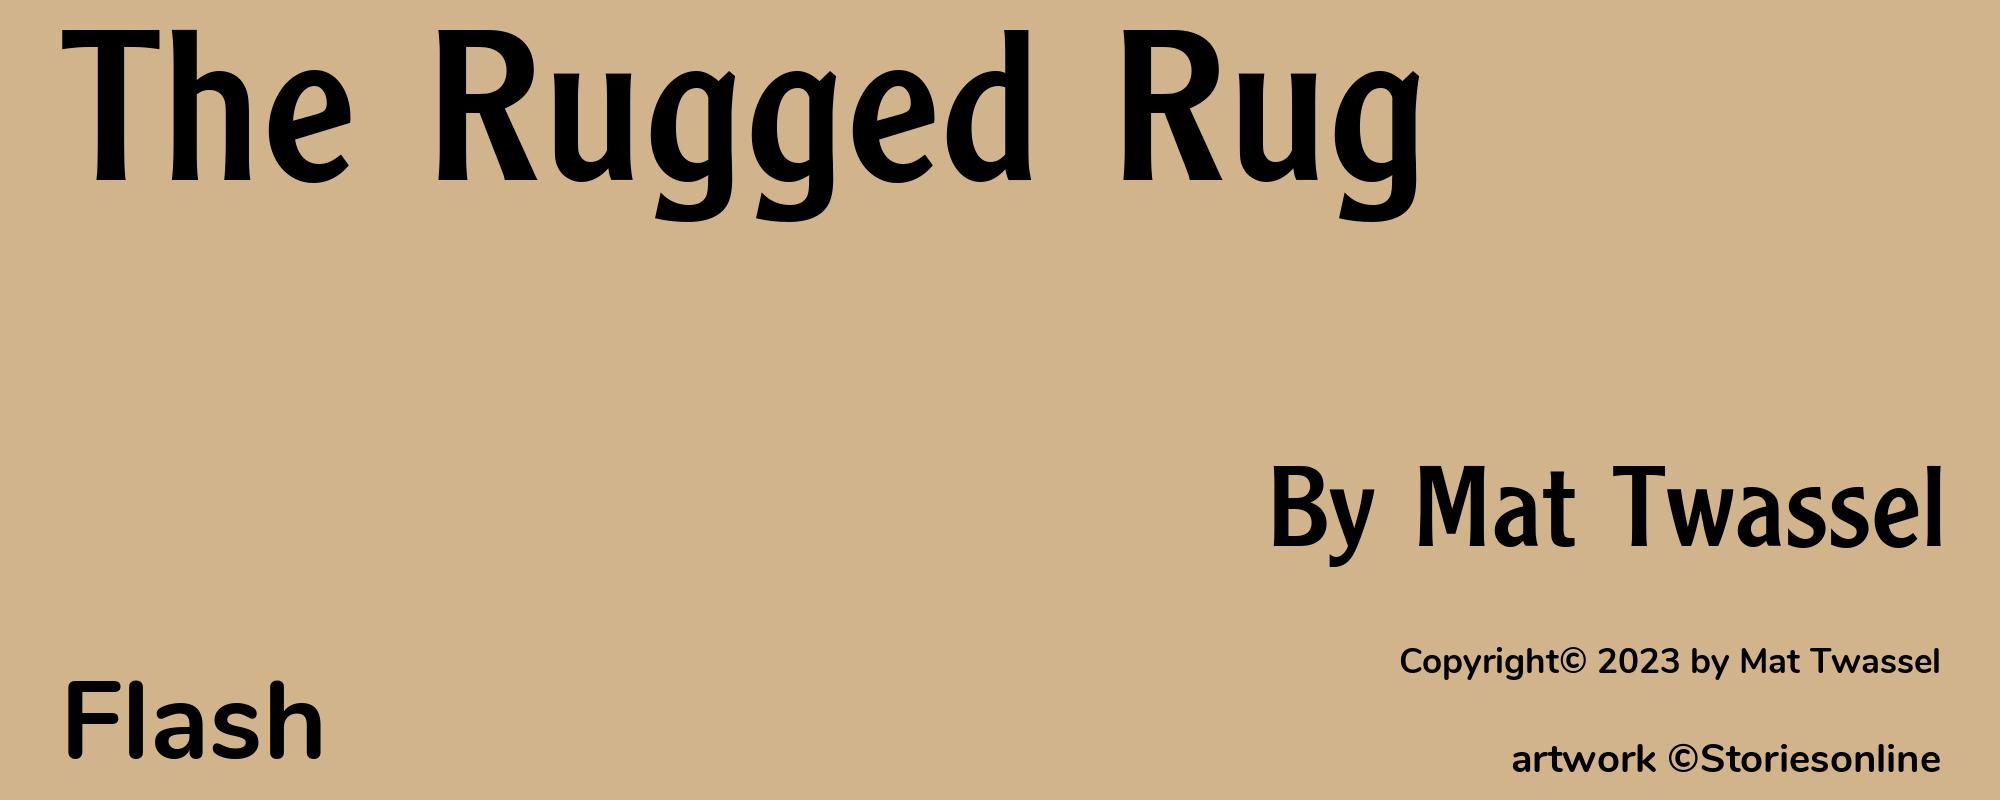 The Rugged Rug - Cover